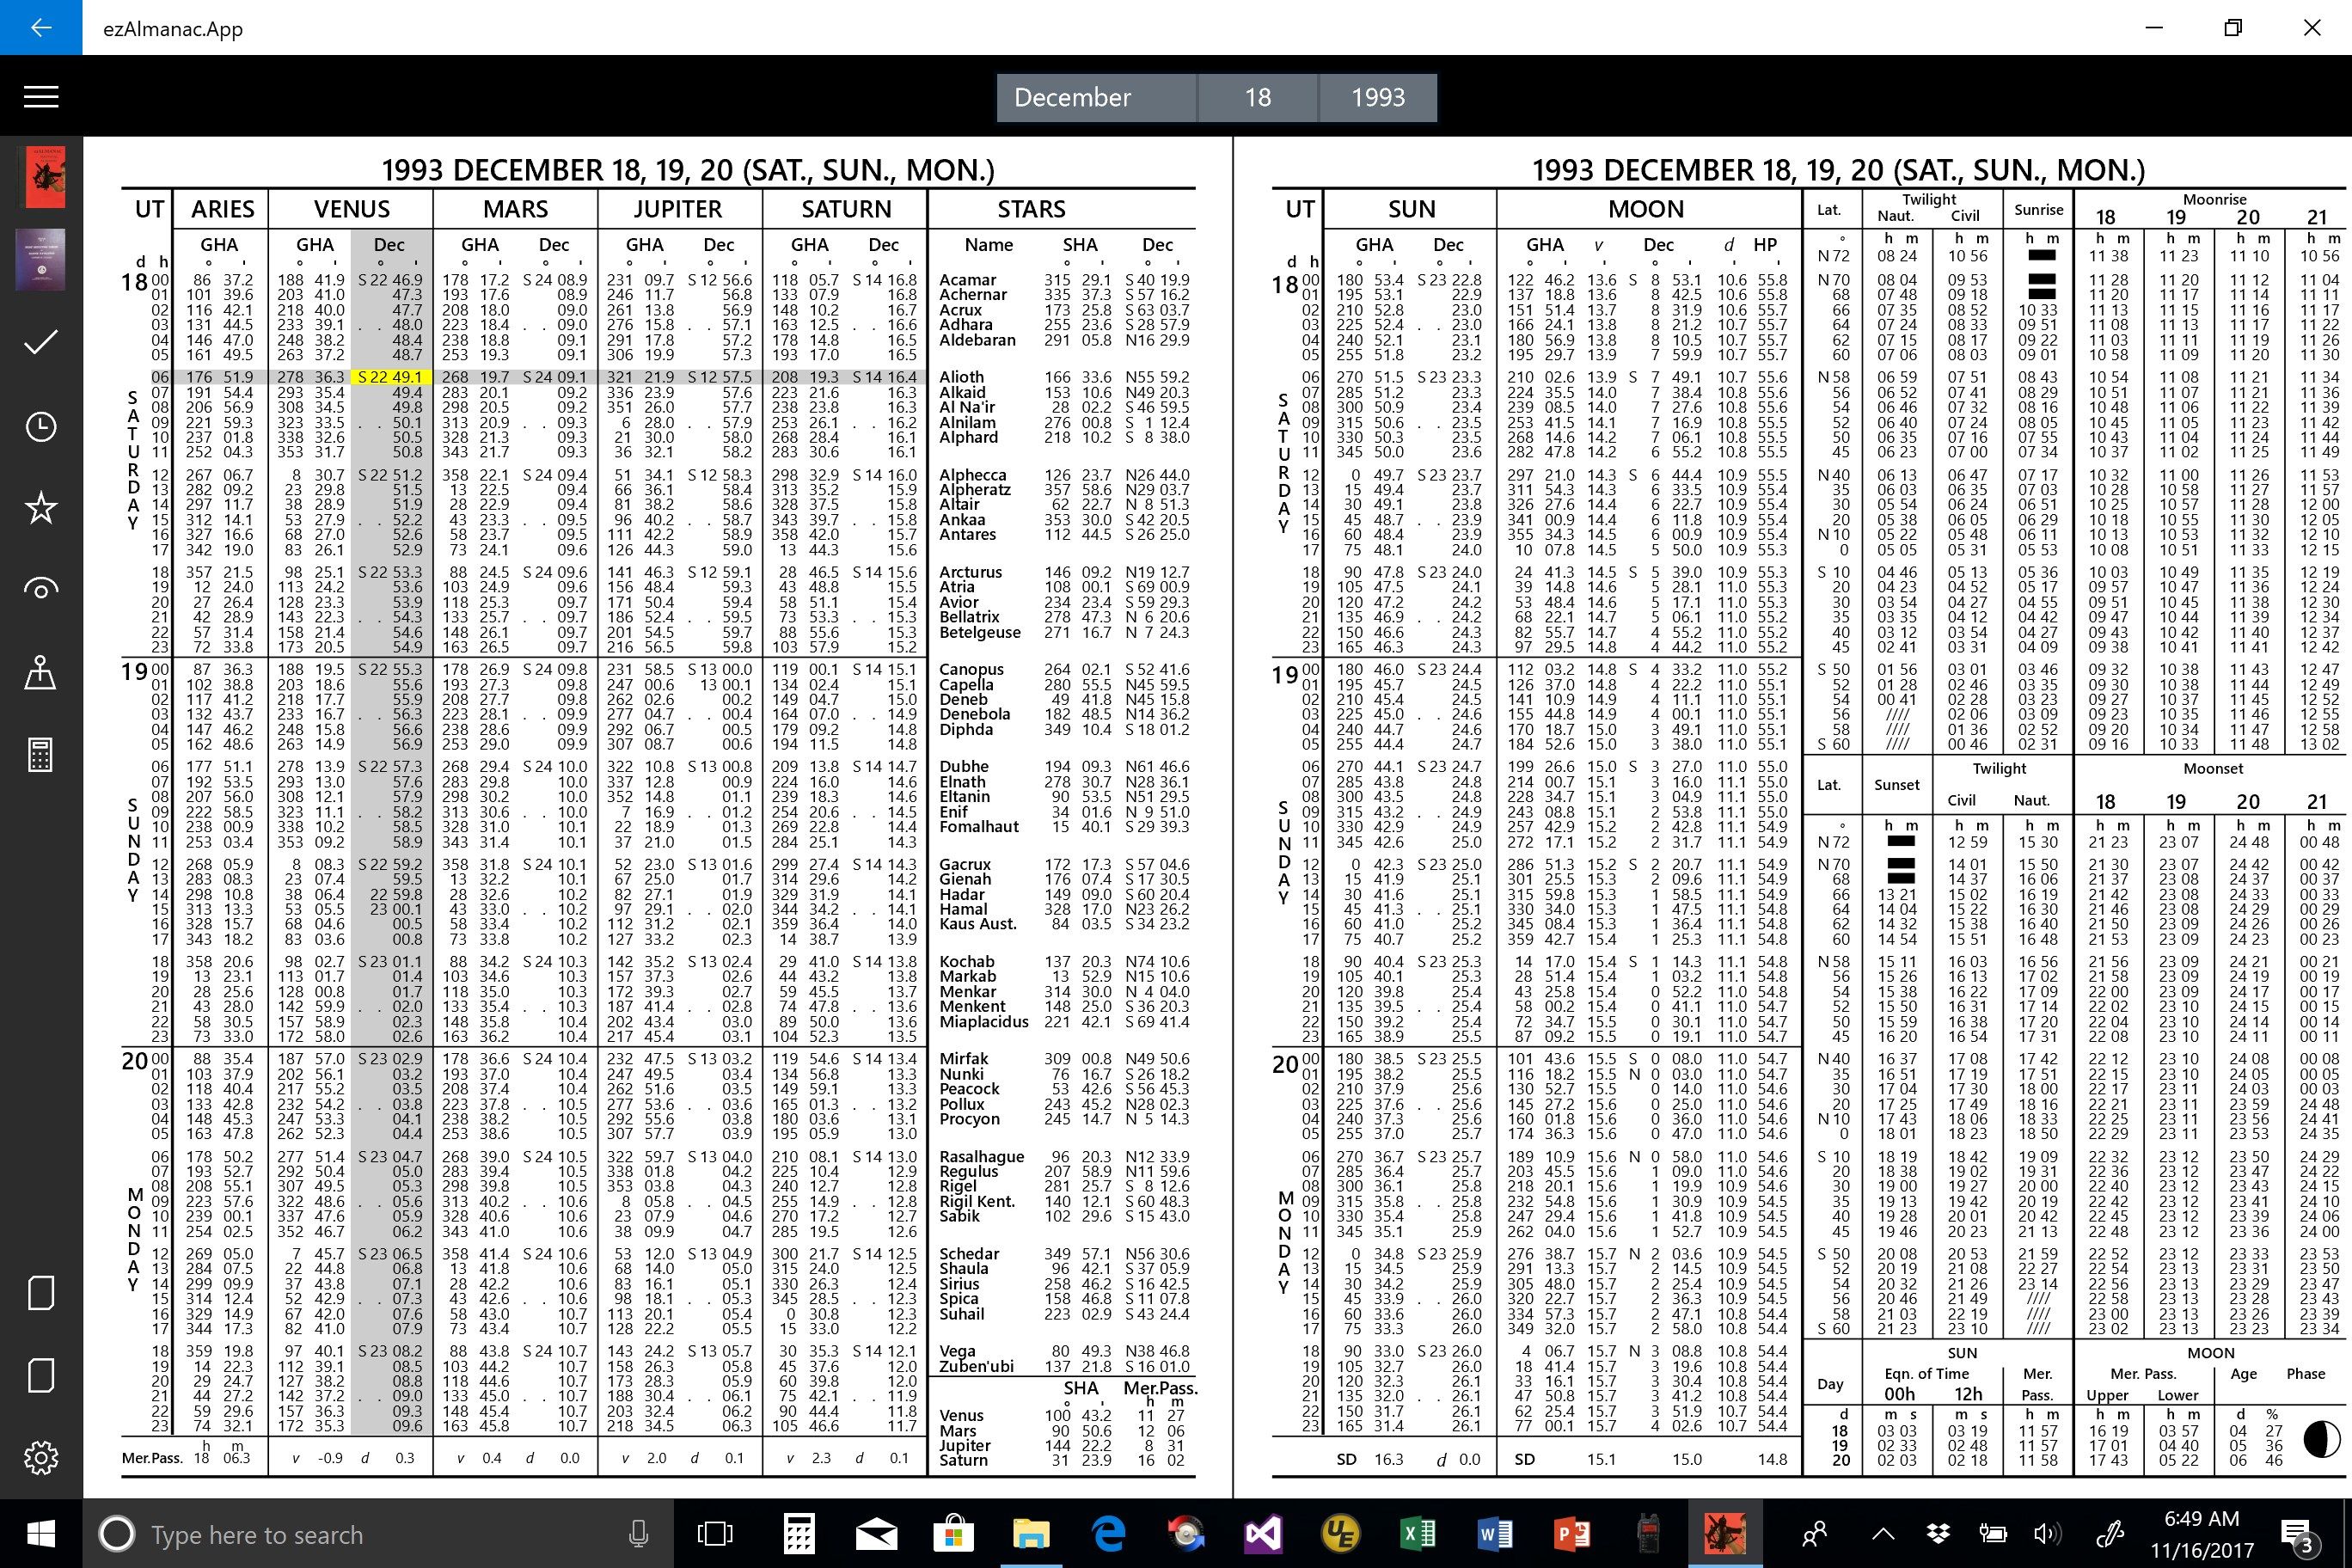 Example Nautical Almanac Daily Page with Highlighting